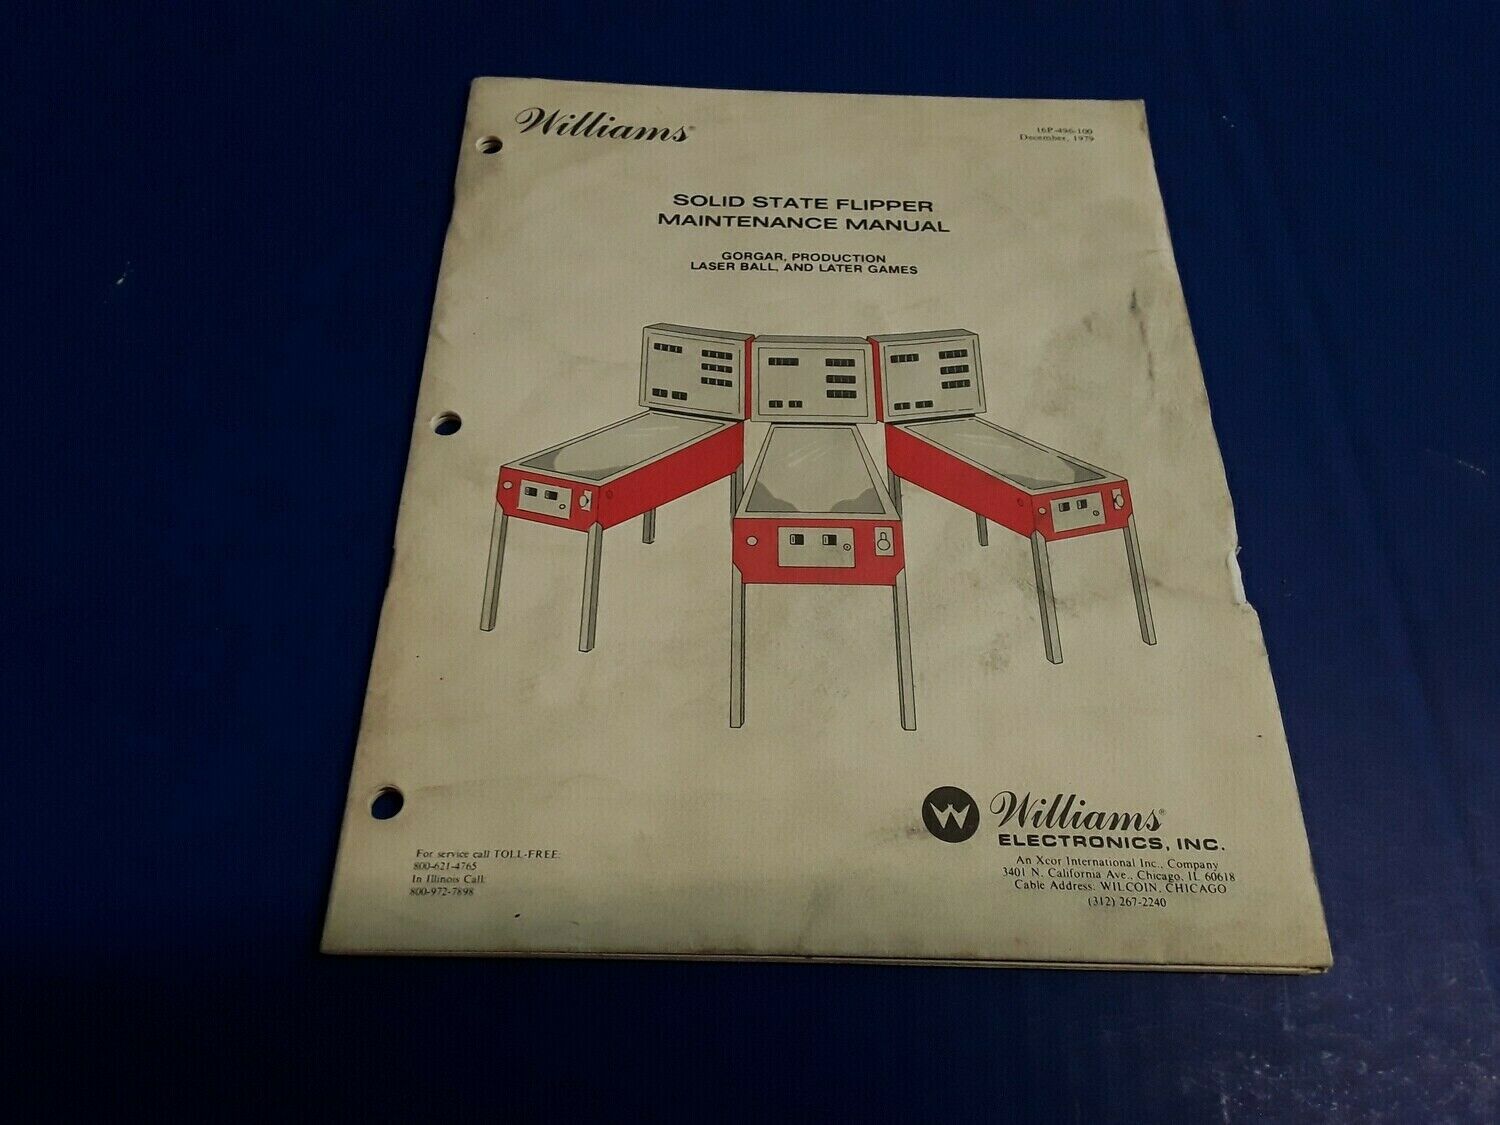 Solid State Flipper Maintenance Manual For Williams Pinballs